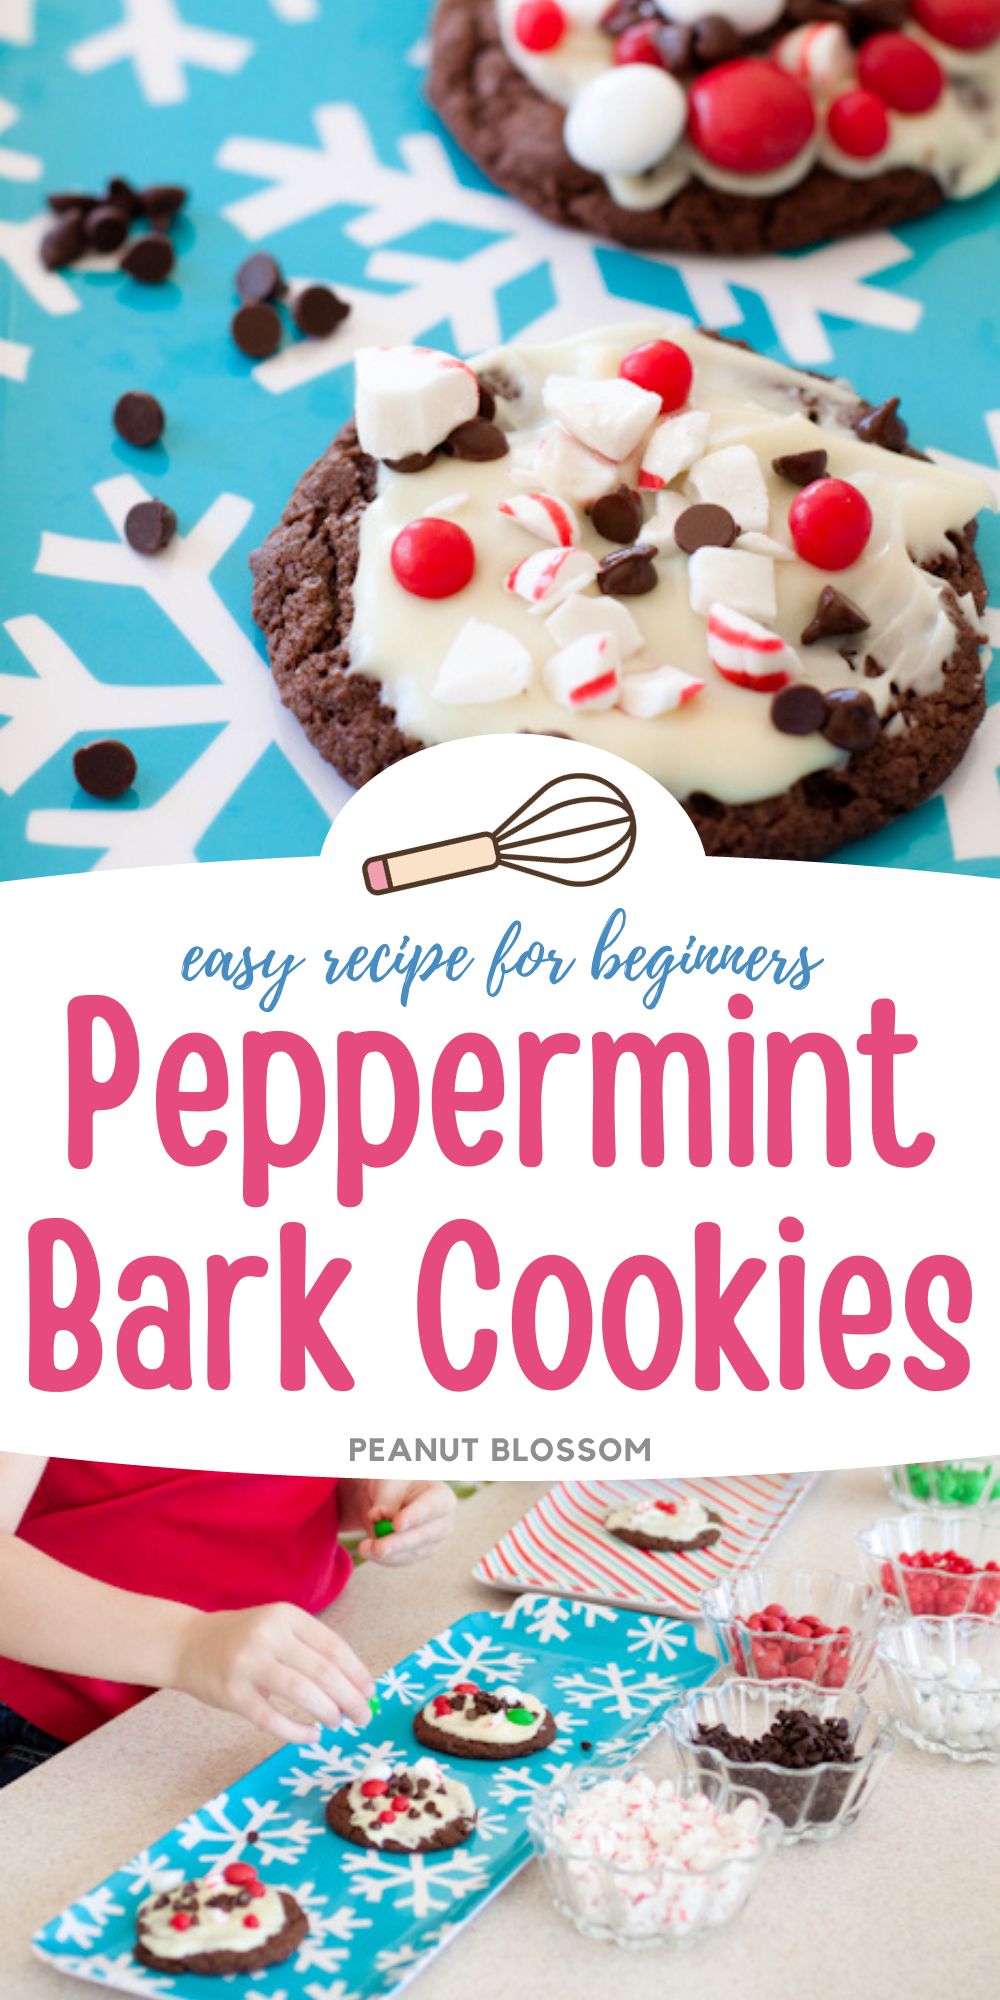 The photo collage shows the finished peppermint bark cookie next to a photo of kids decorating the tops with candies.